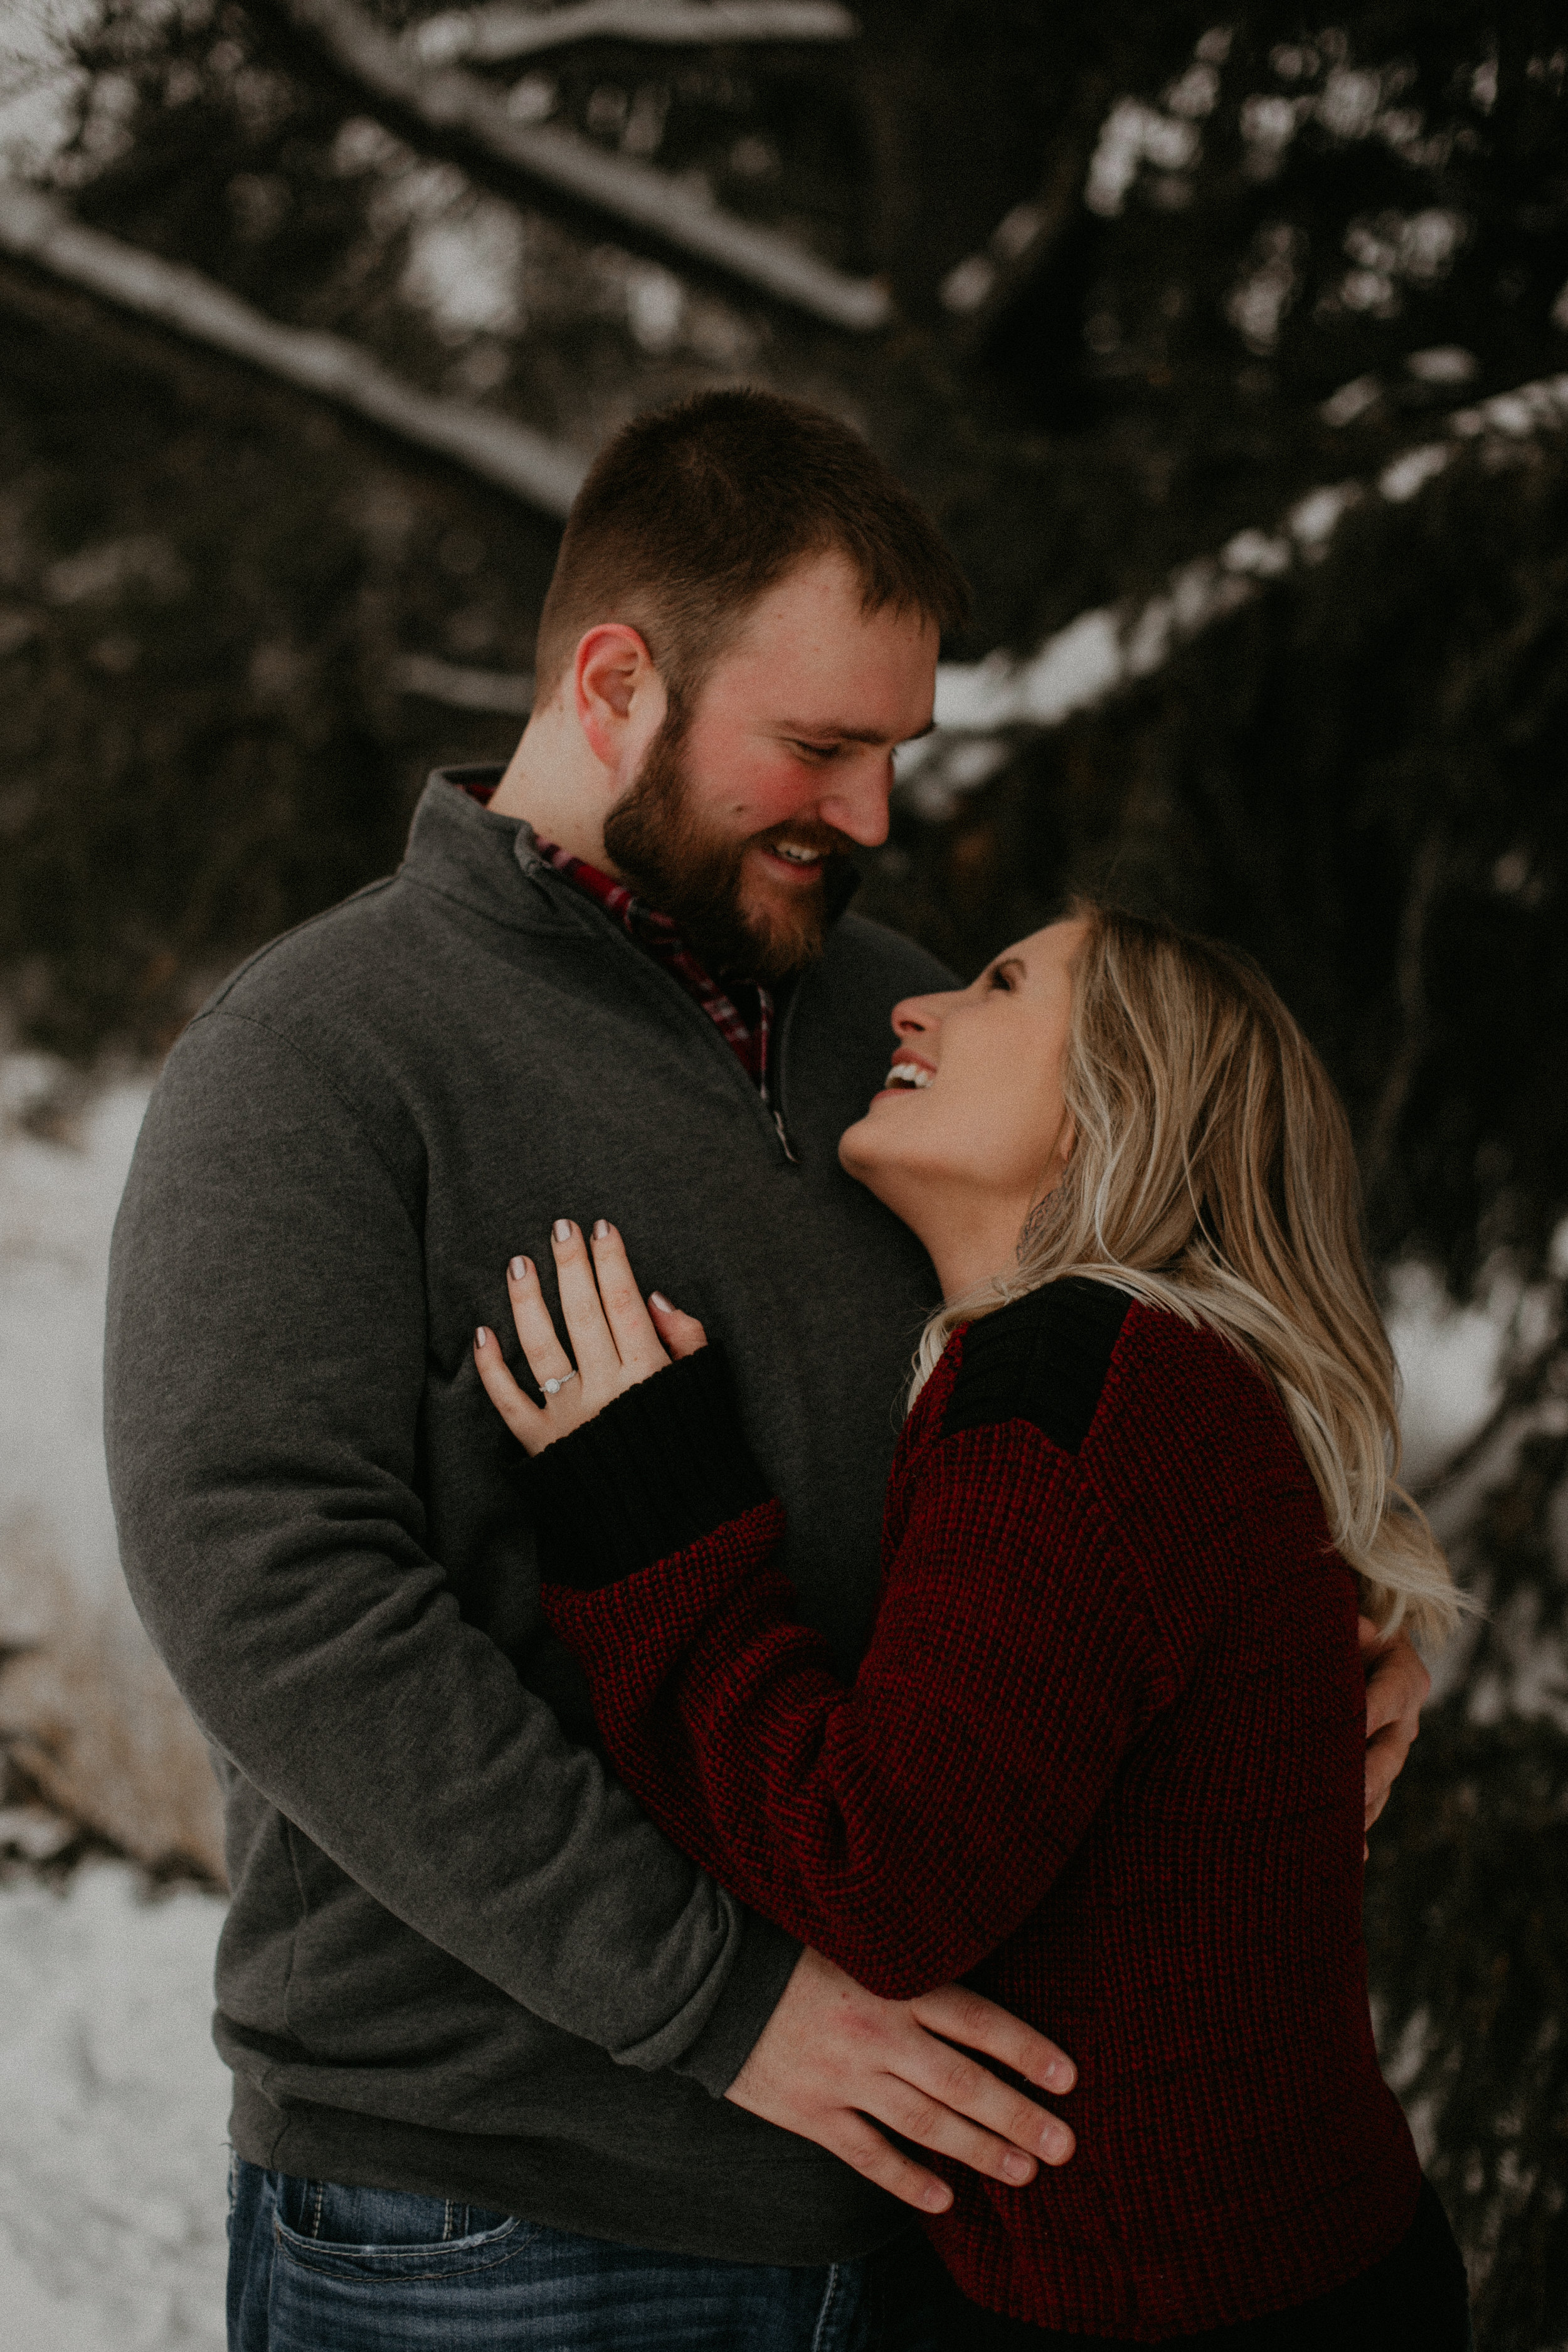  Athens WI couple snuggles in the snow during a winter engagement session 